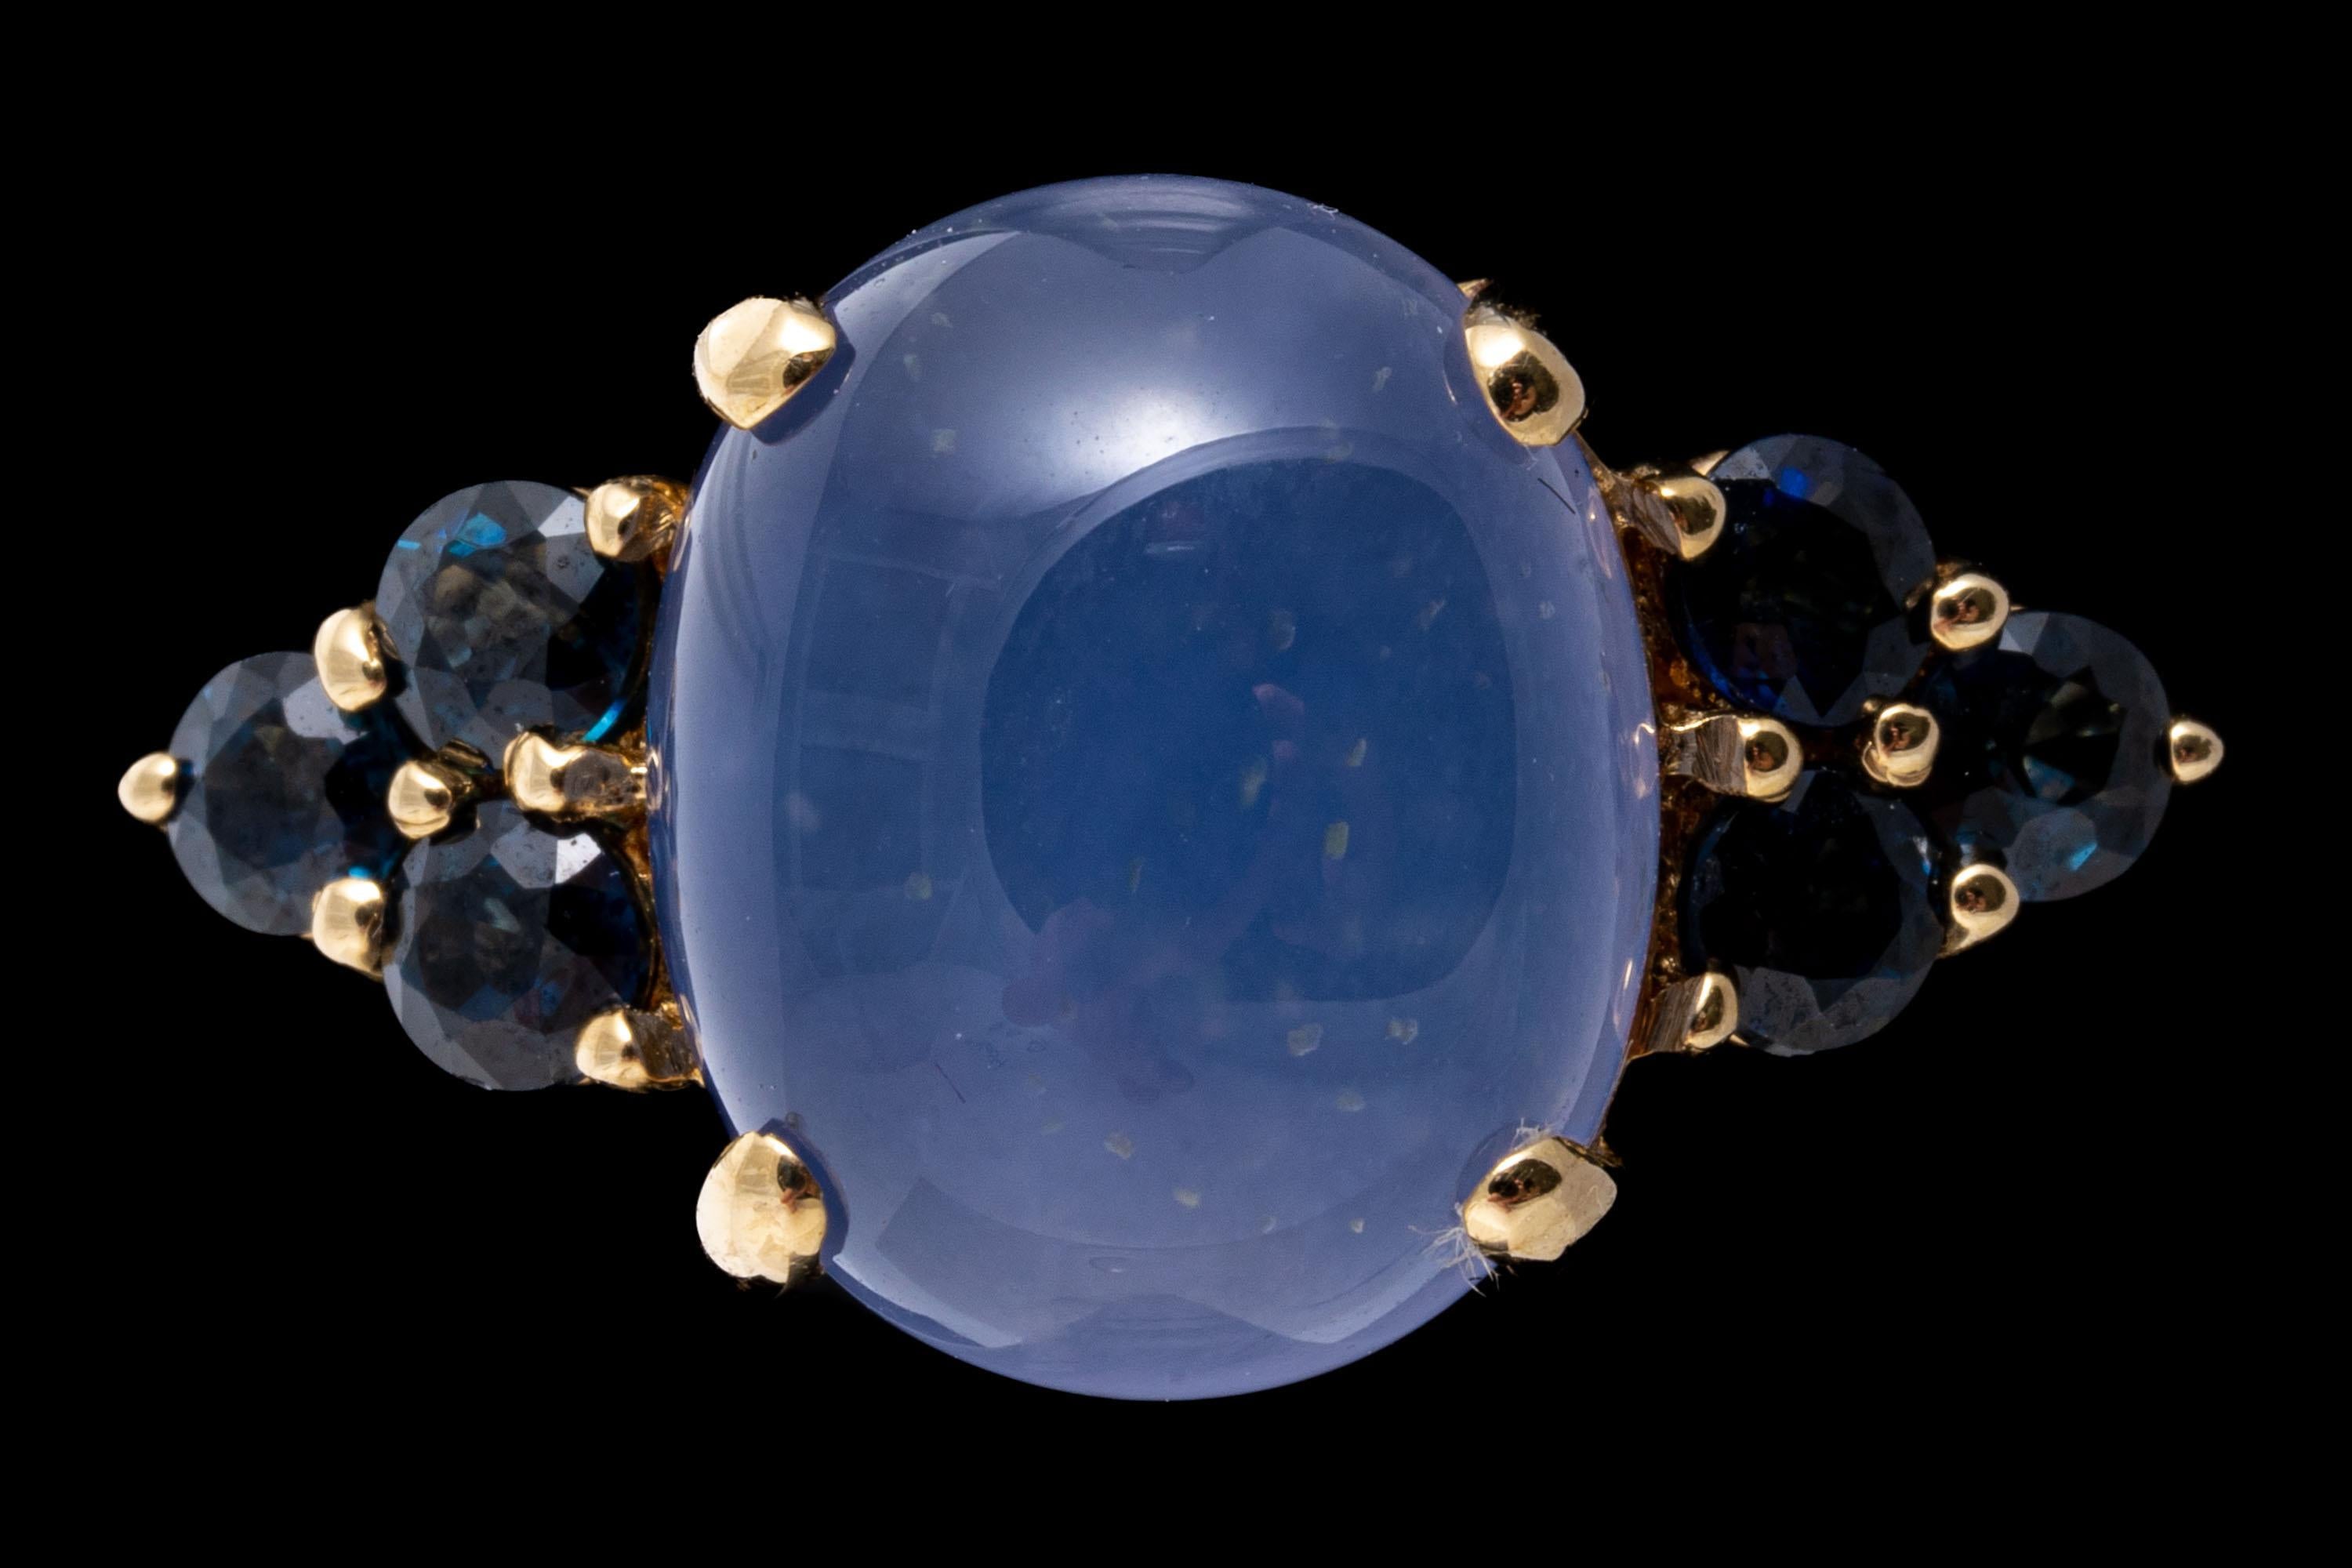 14k yellow gold ring. This colorful ring has an oval cabachon, blue chalcedony center, prong set and flanked by three round faceted, dark blue color sapphires, approximately 0.72 TCW and also prong set. 
Marks: 14k
Dimensions: 13/16